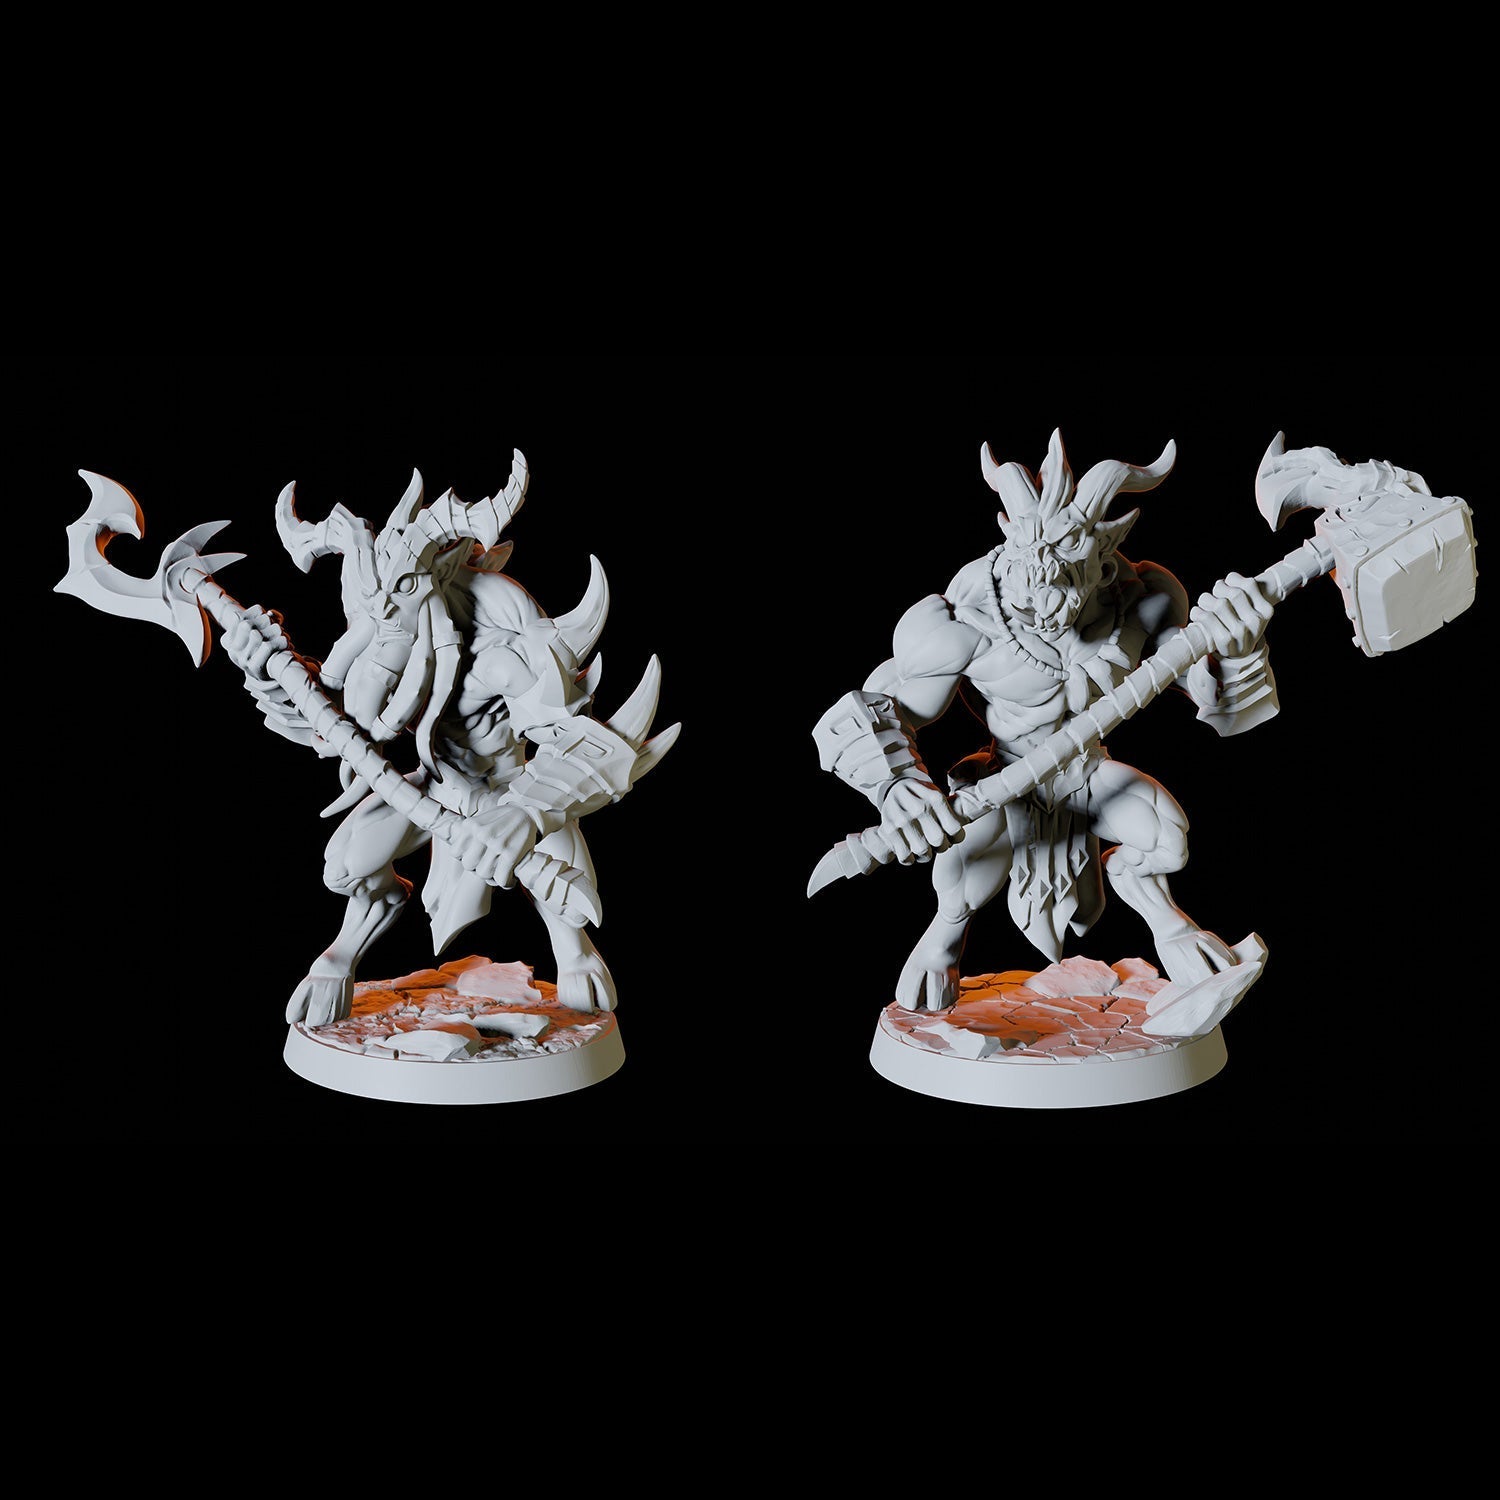 Two Demonic Warrior Miniatures for Dungeons and Dragons - Myth Forged